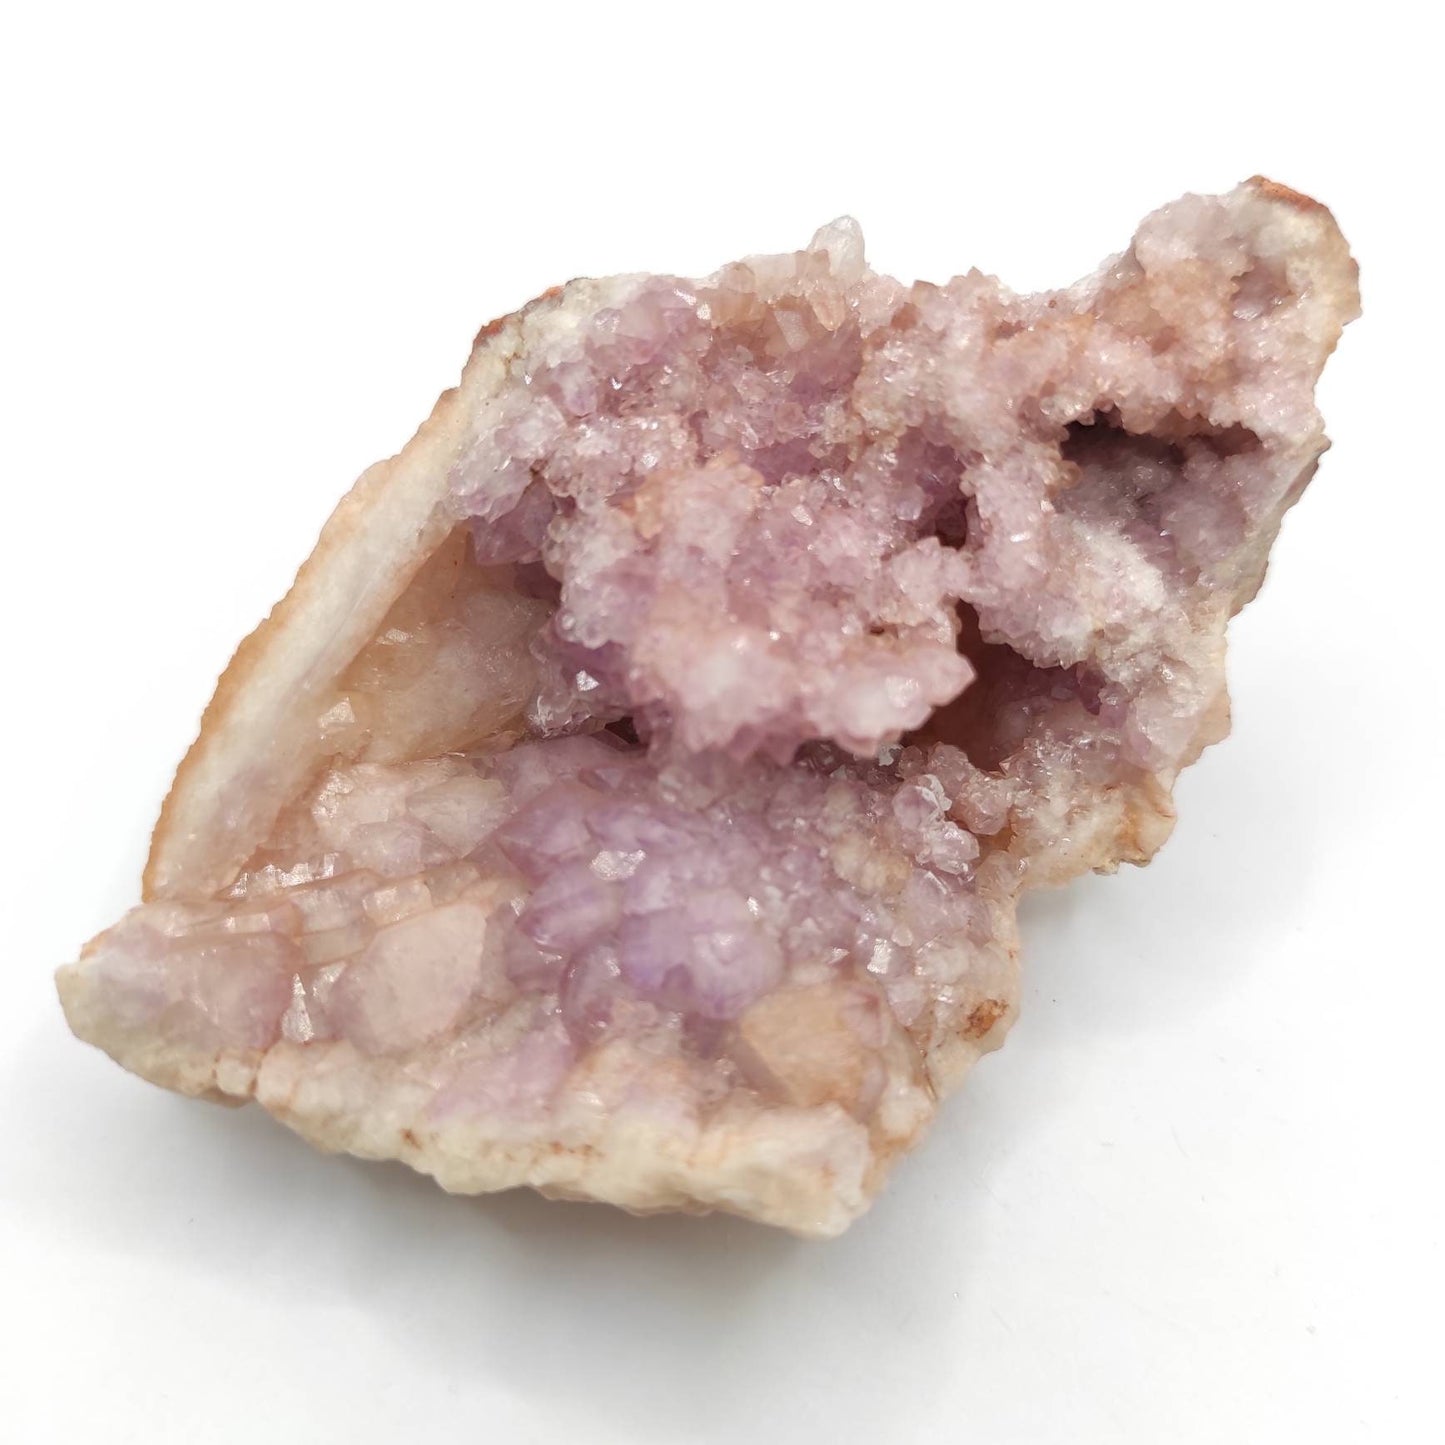 108g Rare Pink Amethyst from Brazil - Raw Pink Amethyst - Healing Crystal Cluster - Natural Pink Amethyst - Unique Crystal -  Amethyst Geode